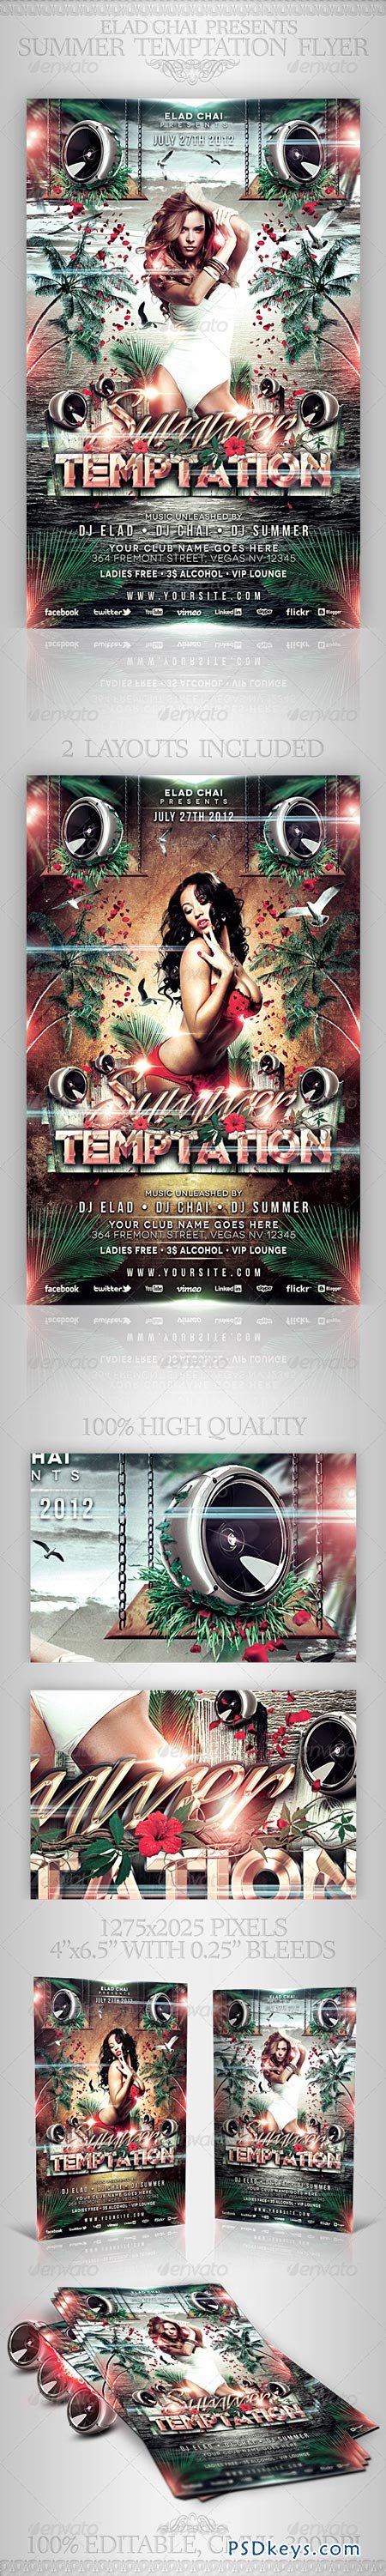 Summer Temptation Party Flyer Template 2657895